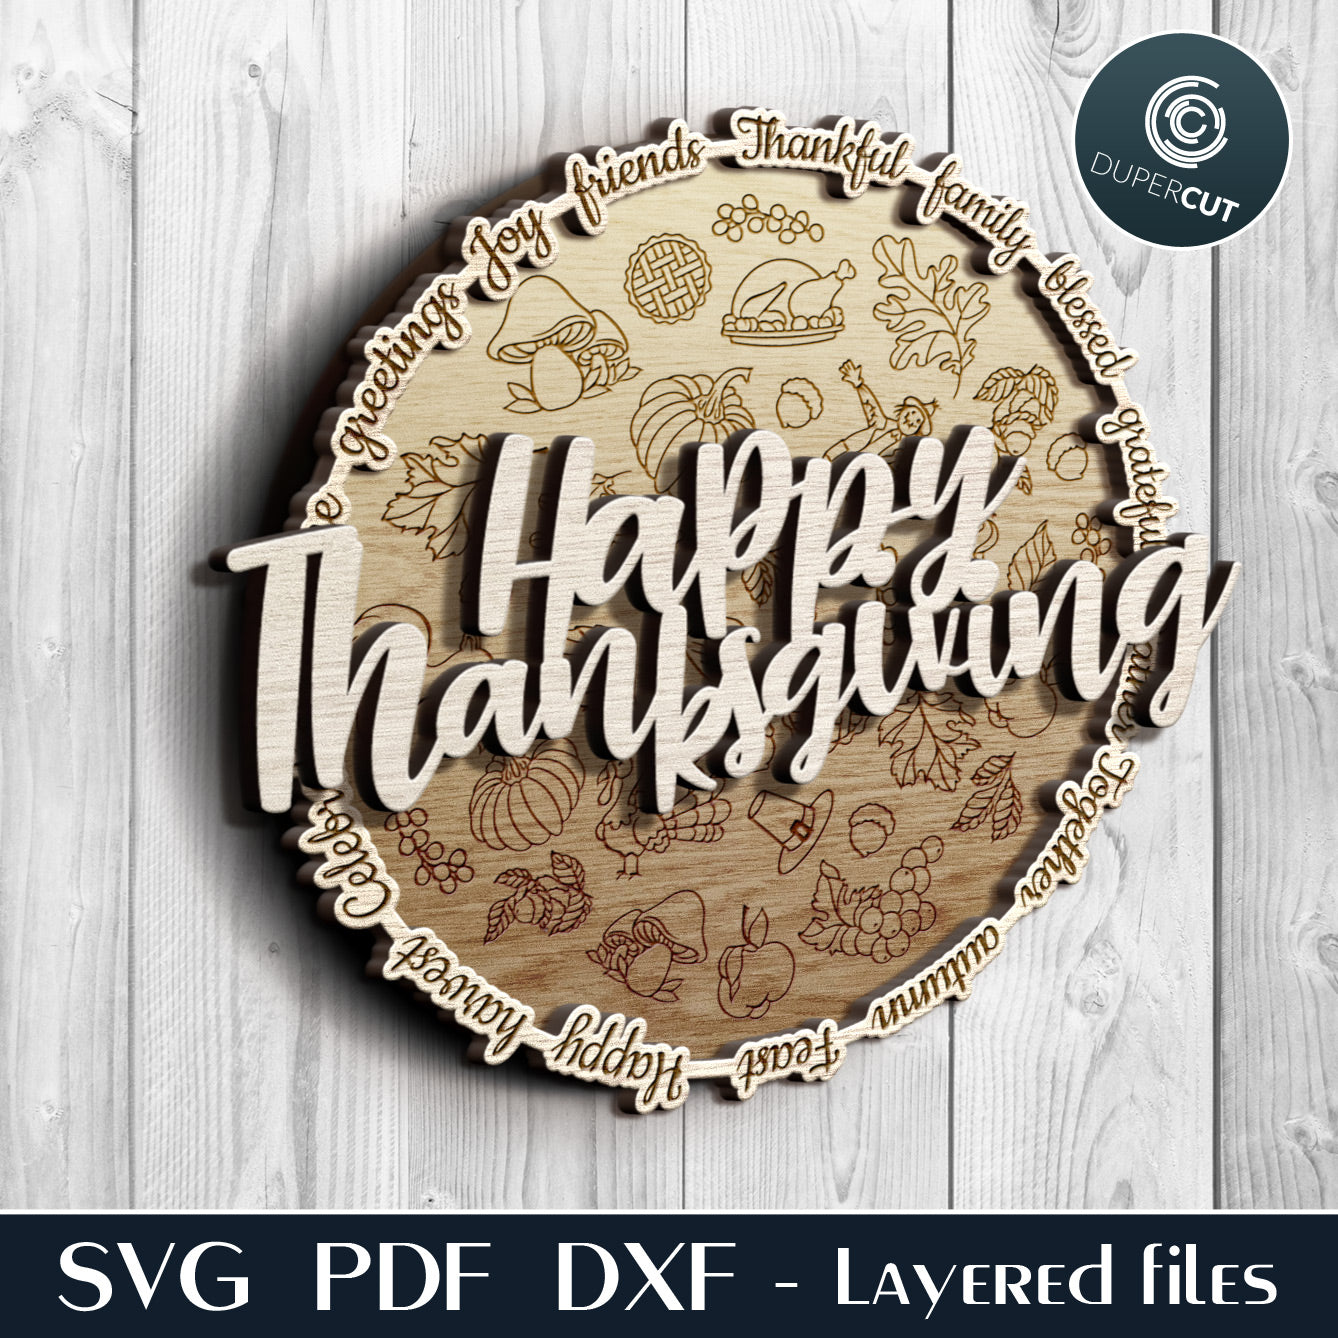 Thanksgiving day celebration wreath, layered round with engraved doodles - SVG PDF DXF files for Glowforge, Cricut, Silhouette cameo, CNC plasma machines